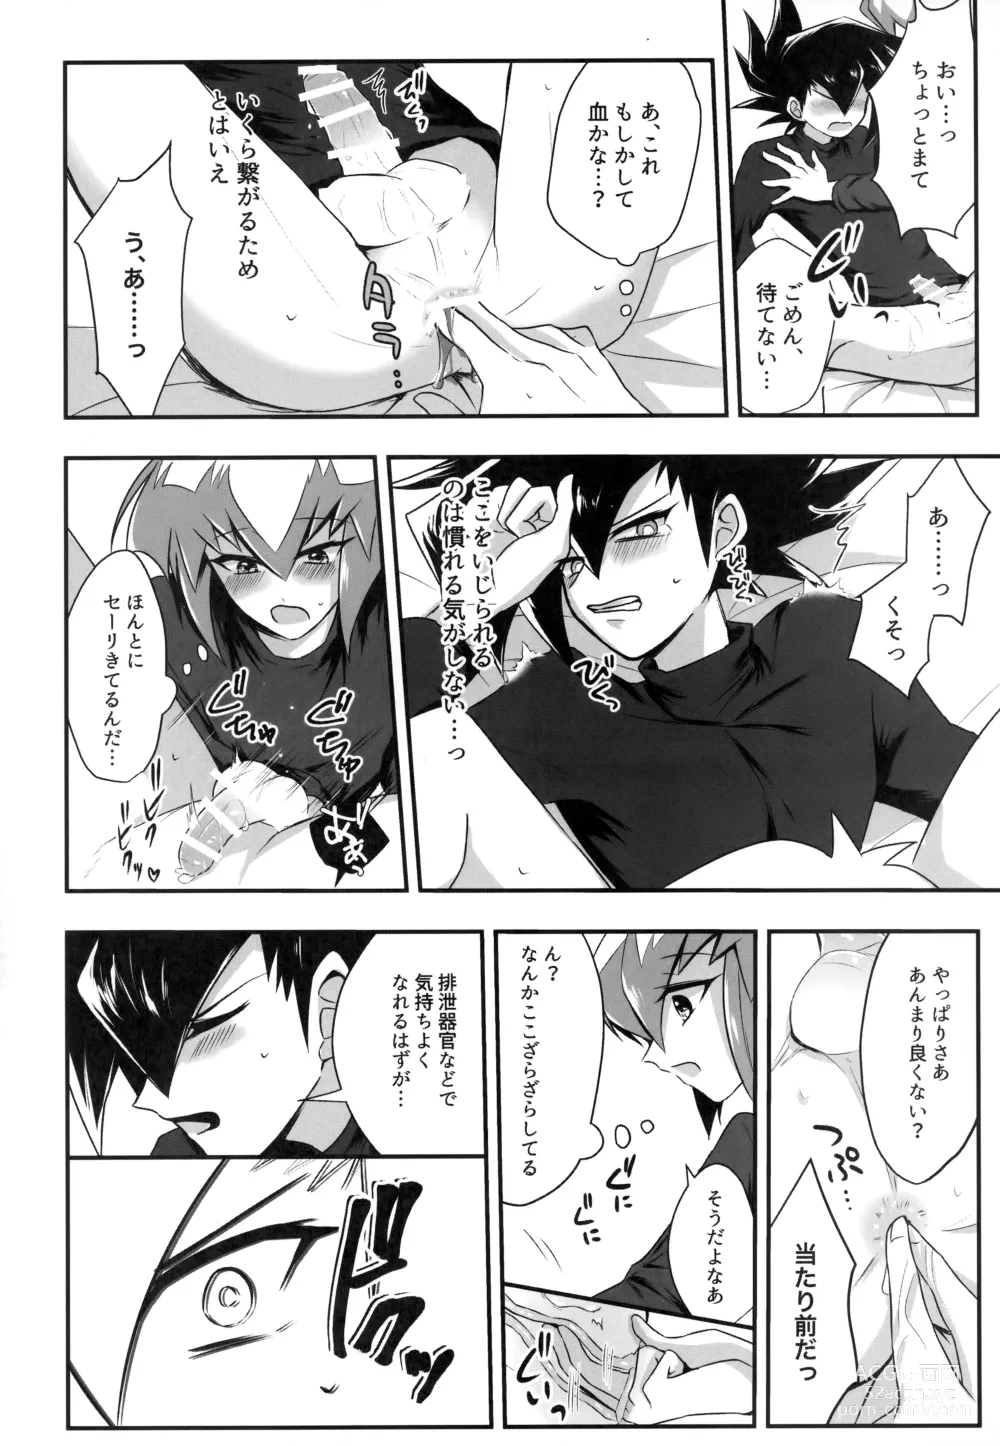 Page 21 of doujinshi MY GENERATION